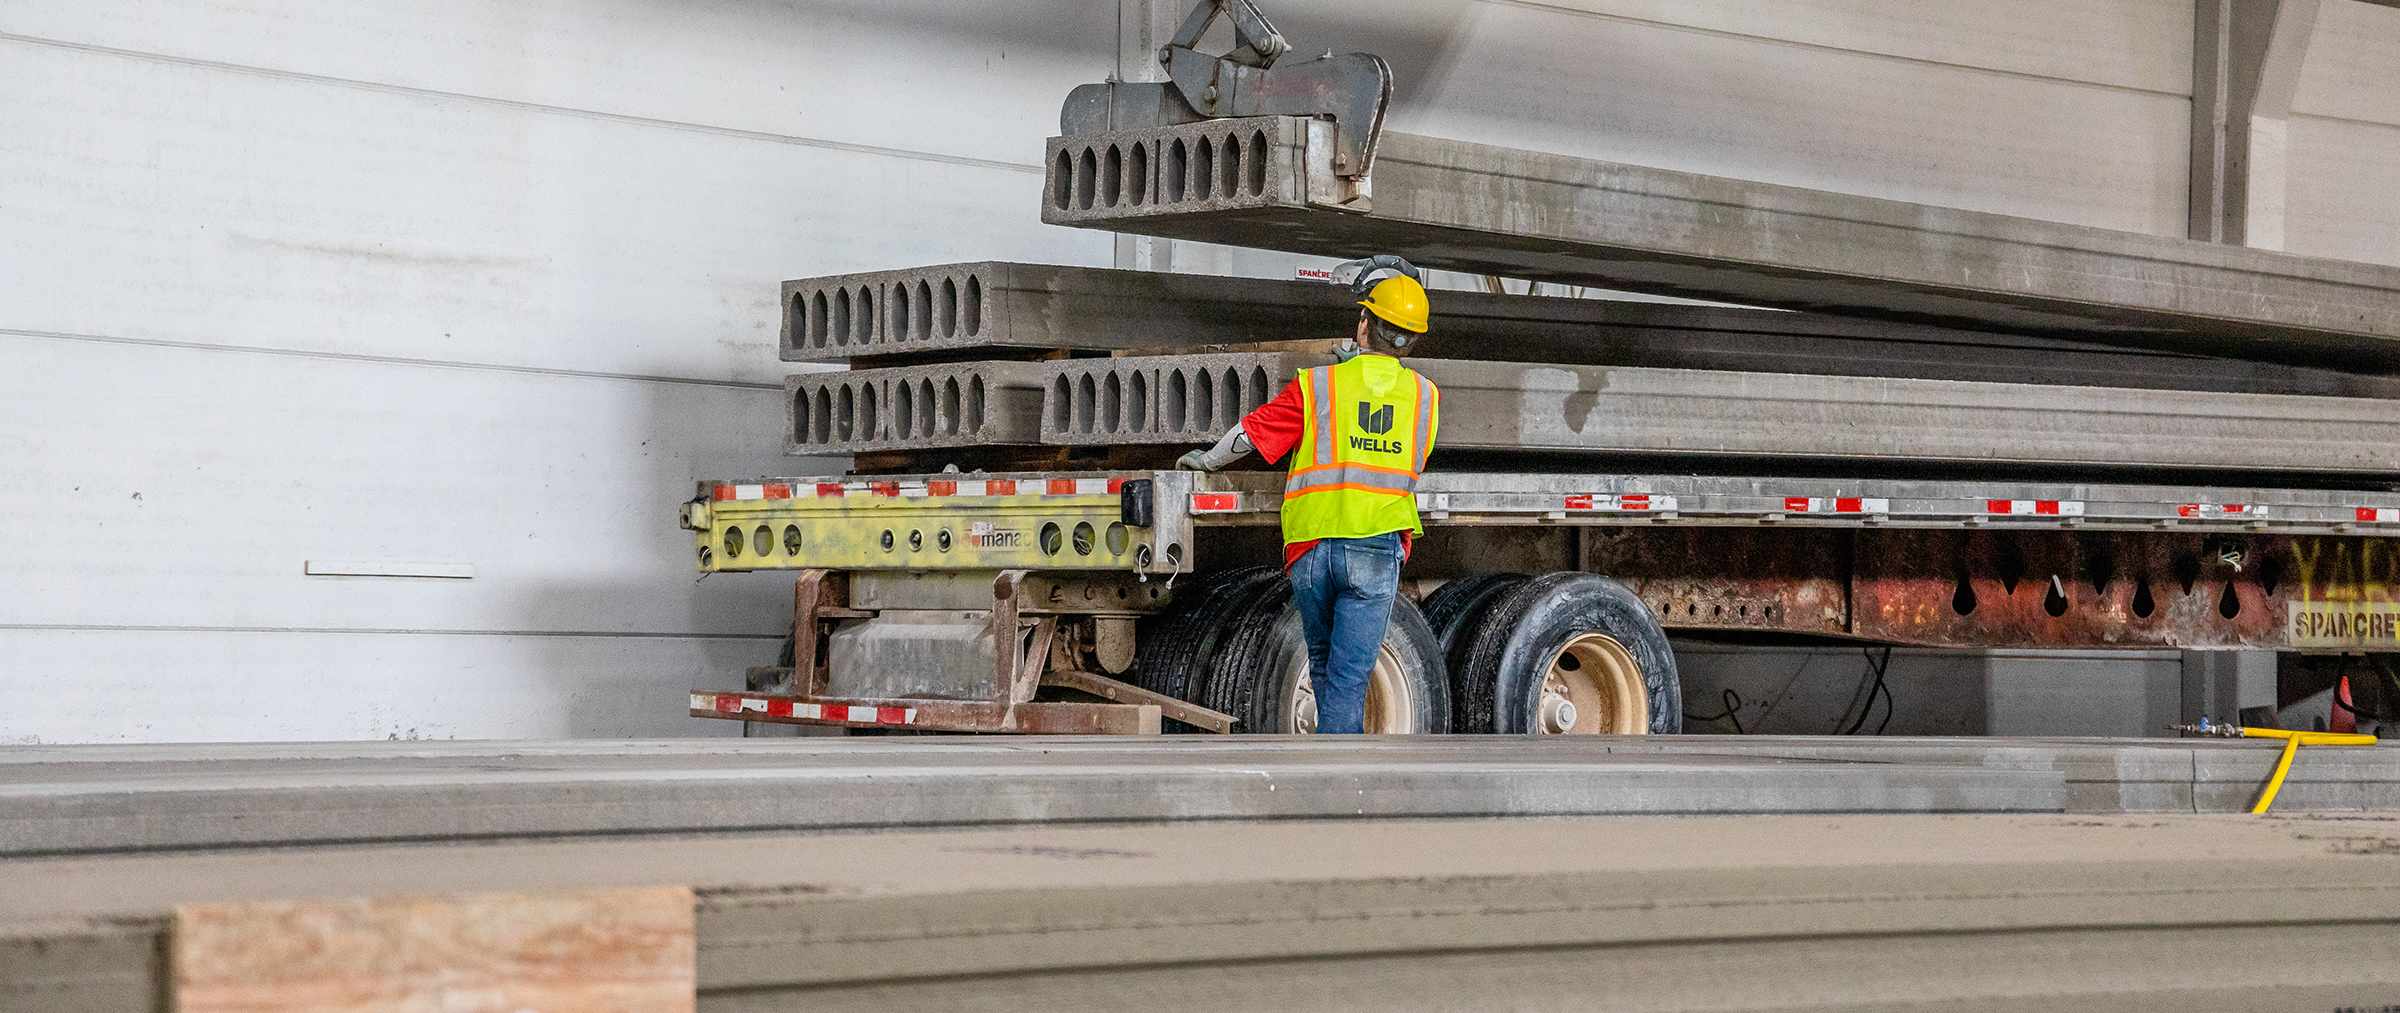 hollowcore being stacked on a flatbed truck in manufacturing facility